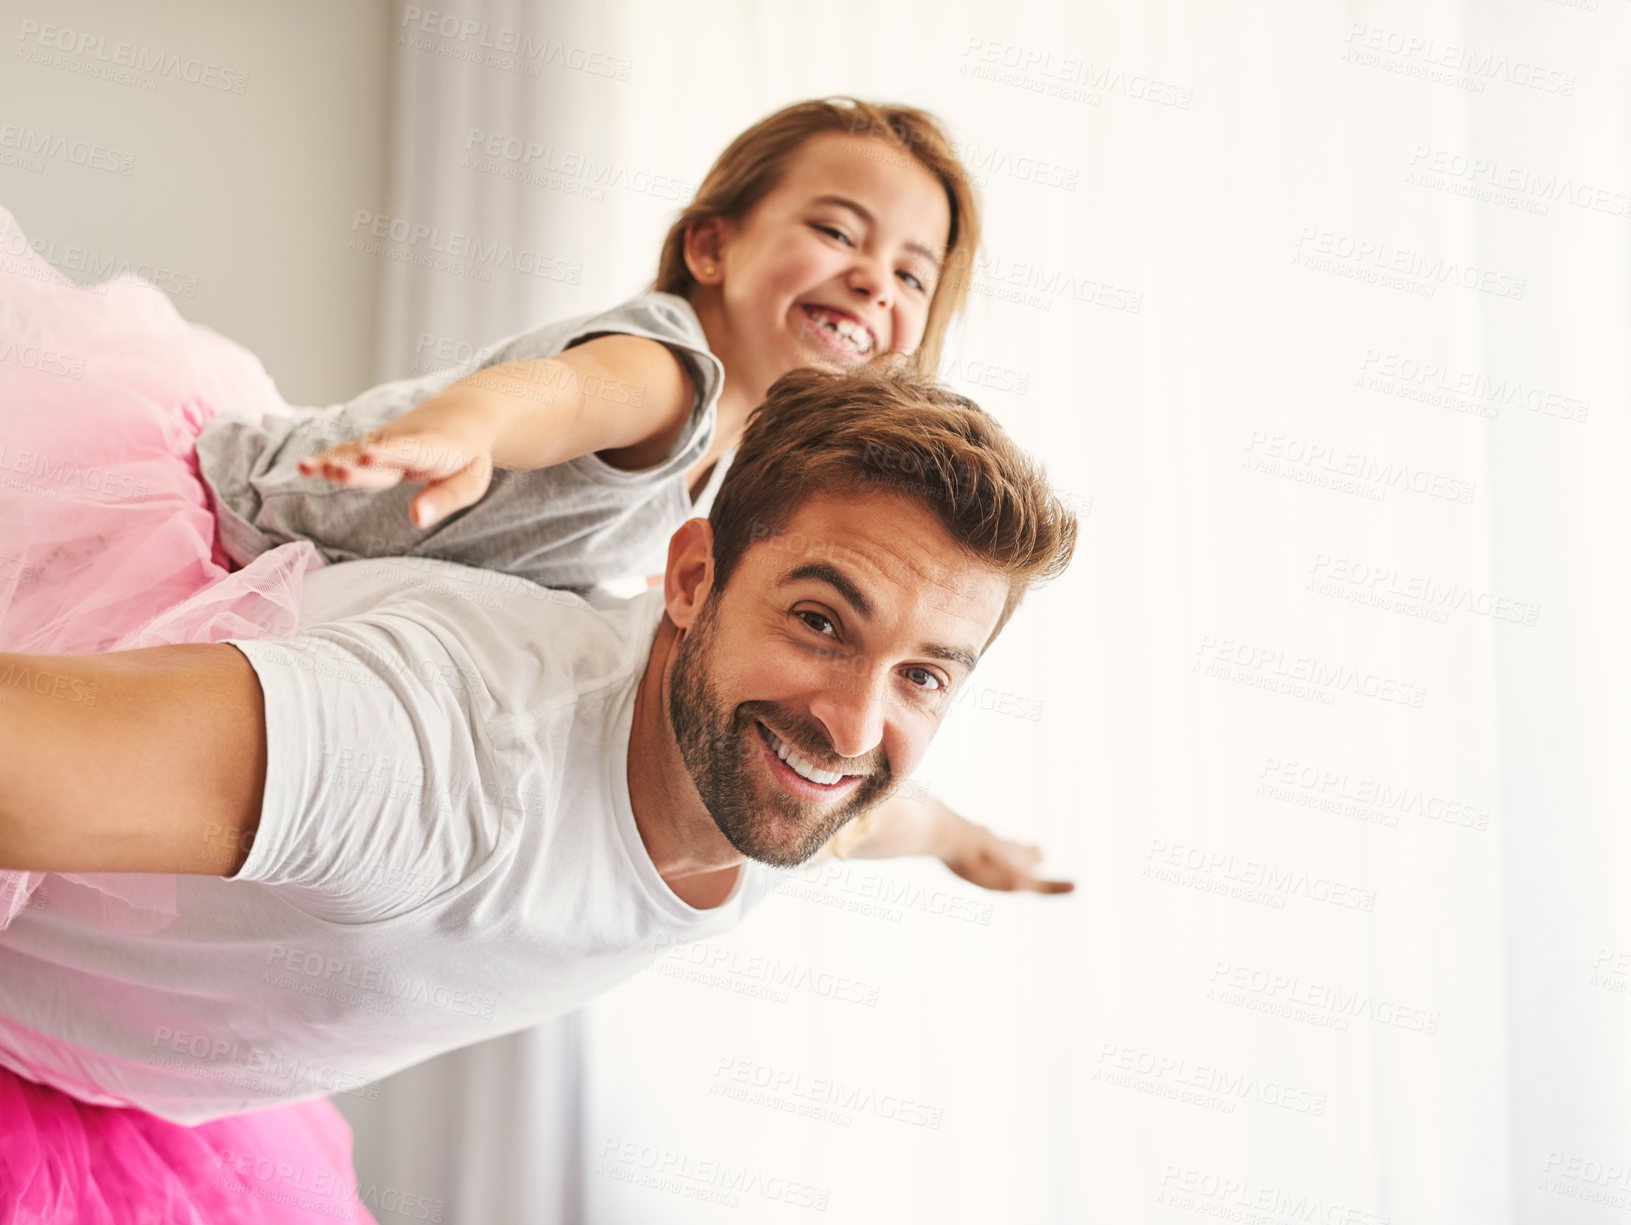 Buy stock photo Cropped portrait of a handsome young man piggybacking his daughter at home